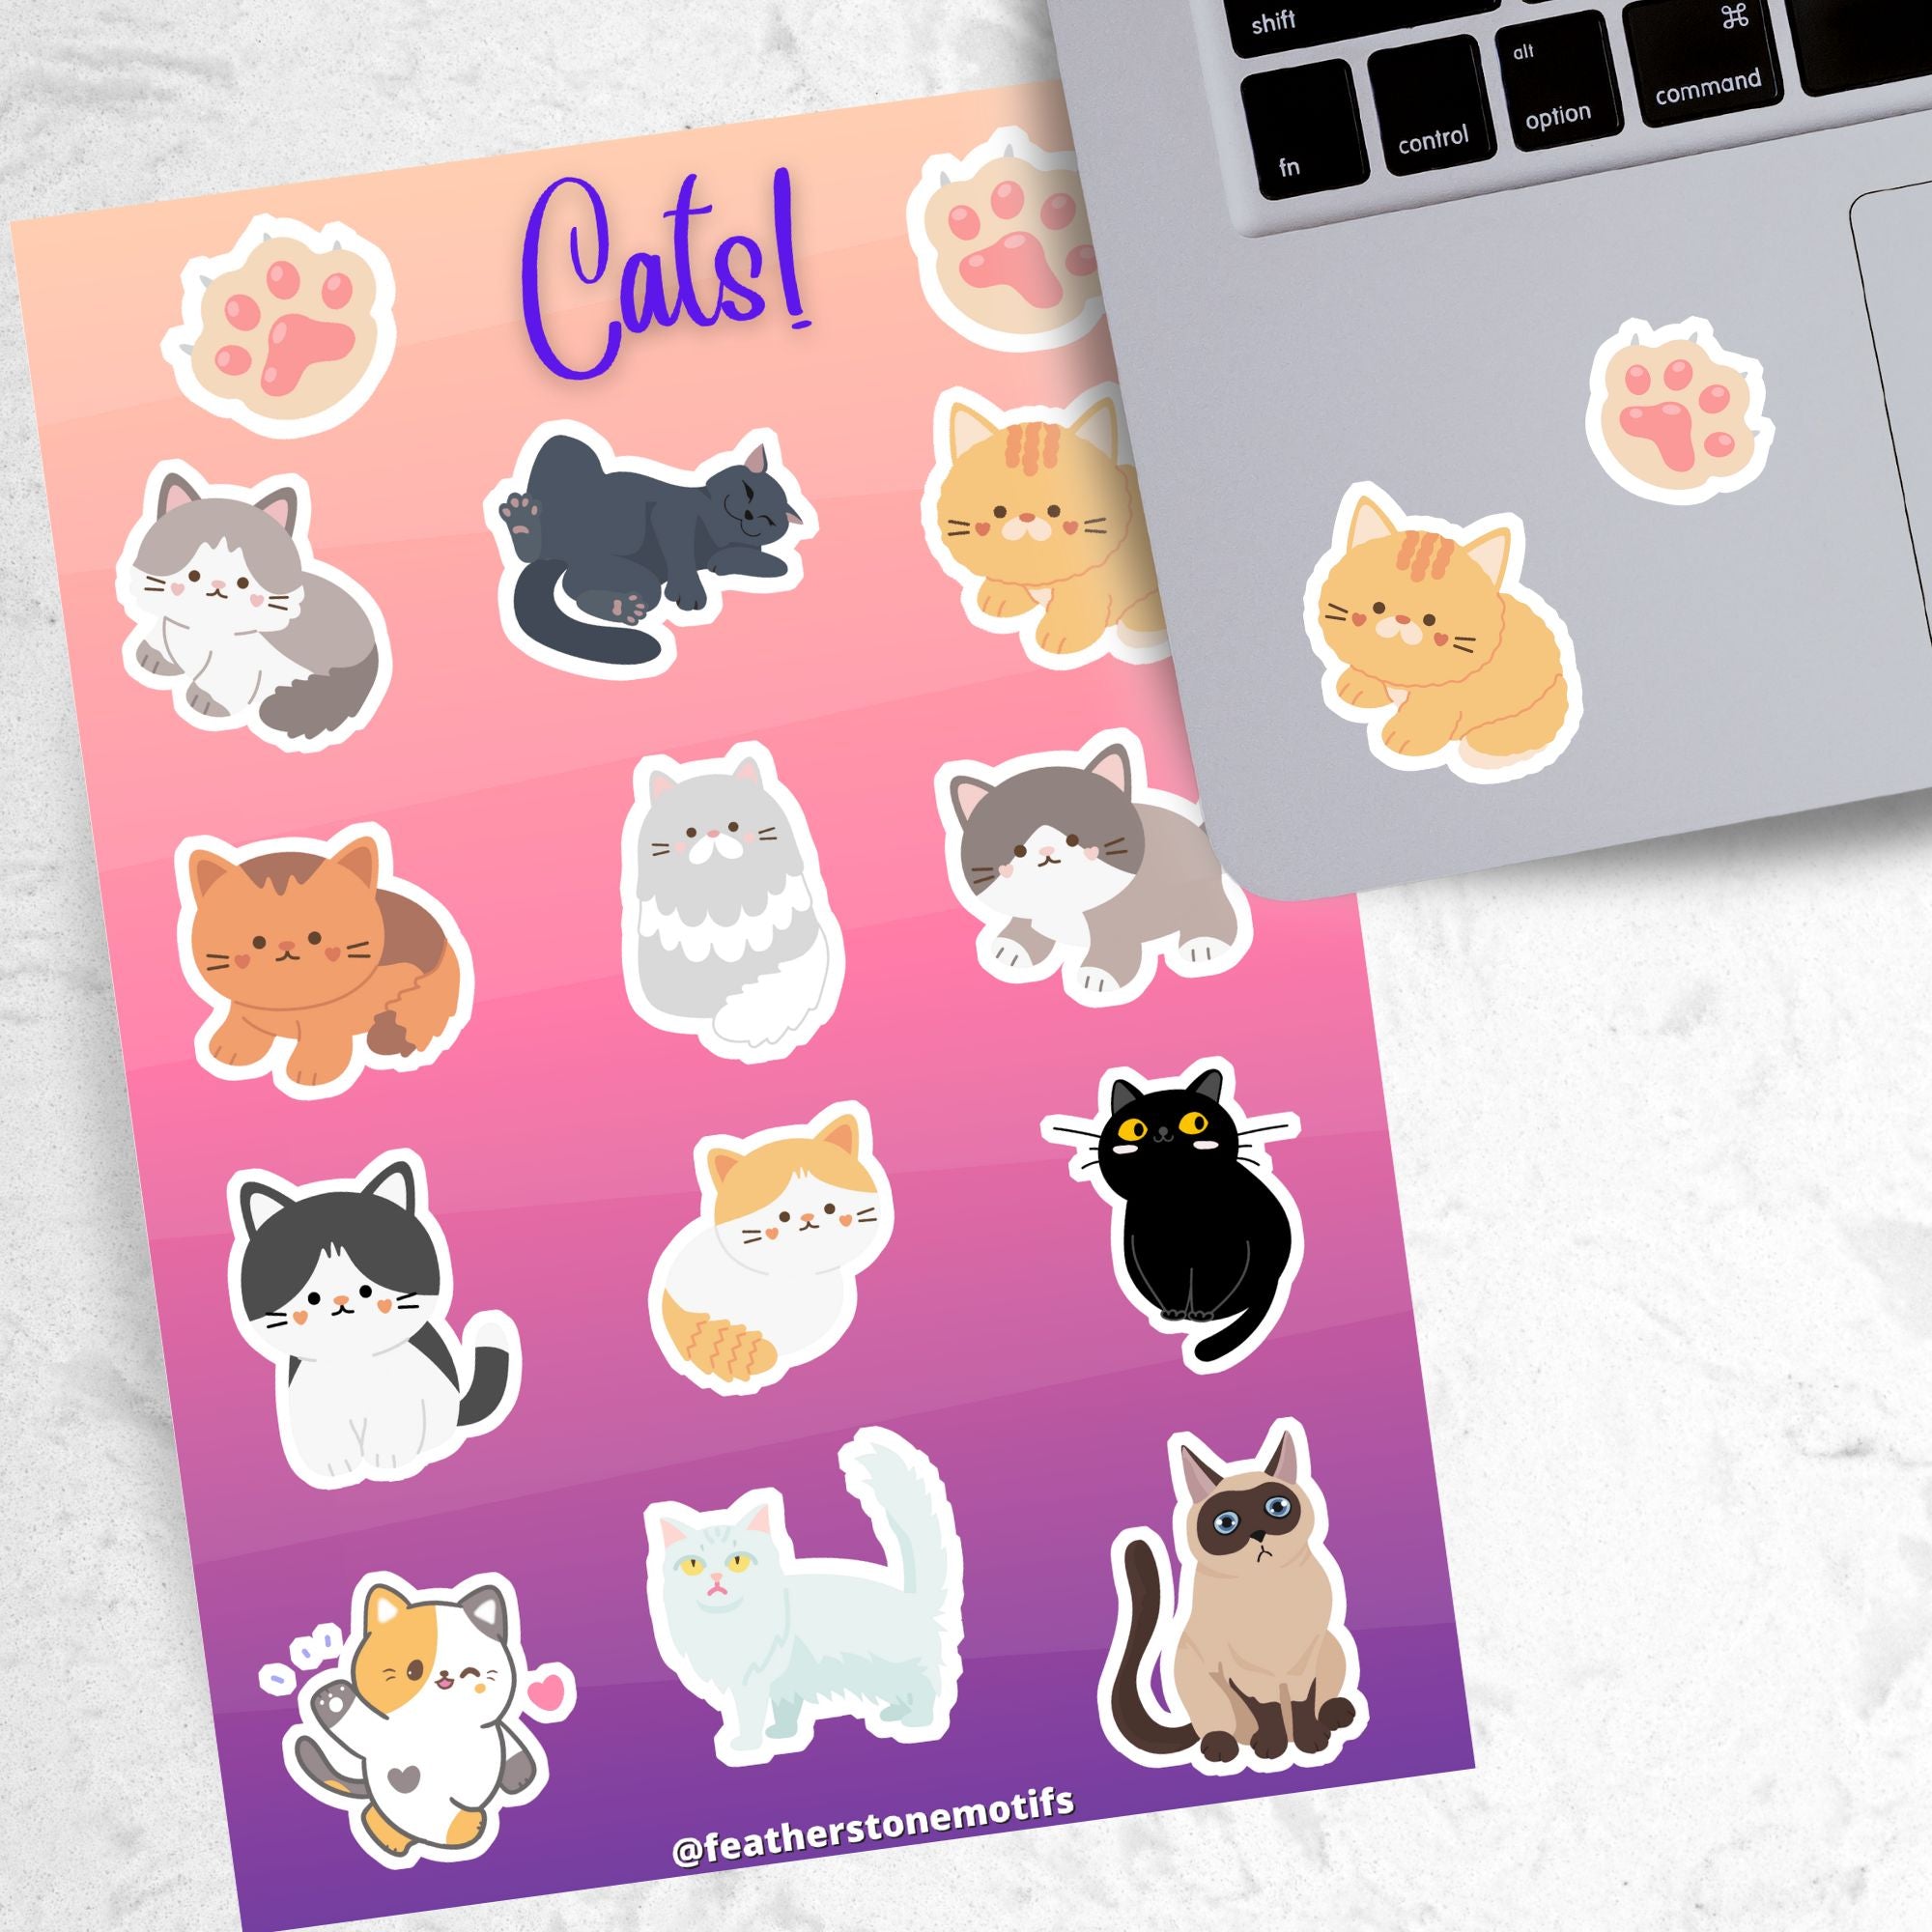 This sticker sheet is purrfect for all cat lovers! It has stickers of 12 different cute and cuddly cats, plus two pawprint stickers. This image shows the sticker sheet next to an open laptop with tan kitty and pawprint stickers below the keyboard.